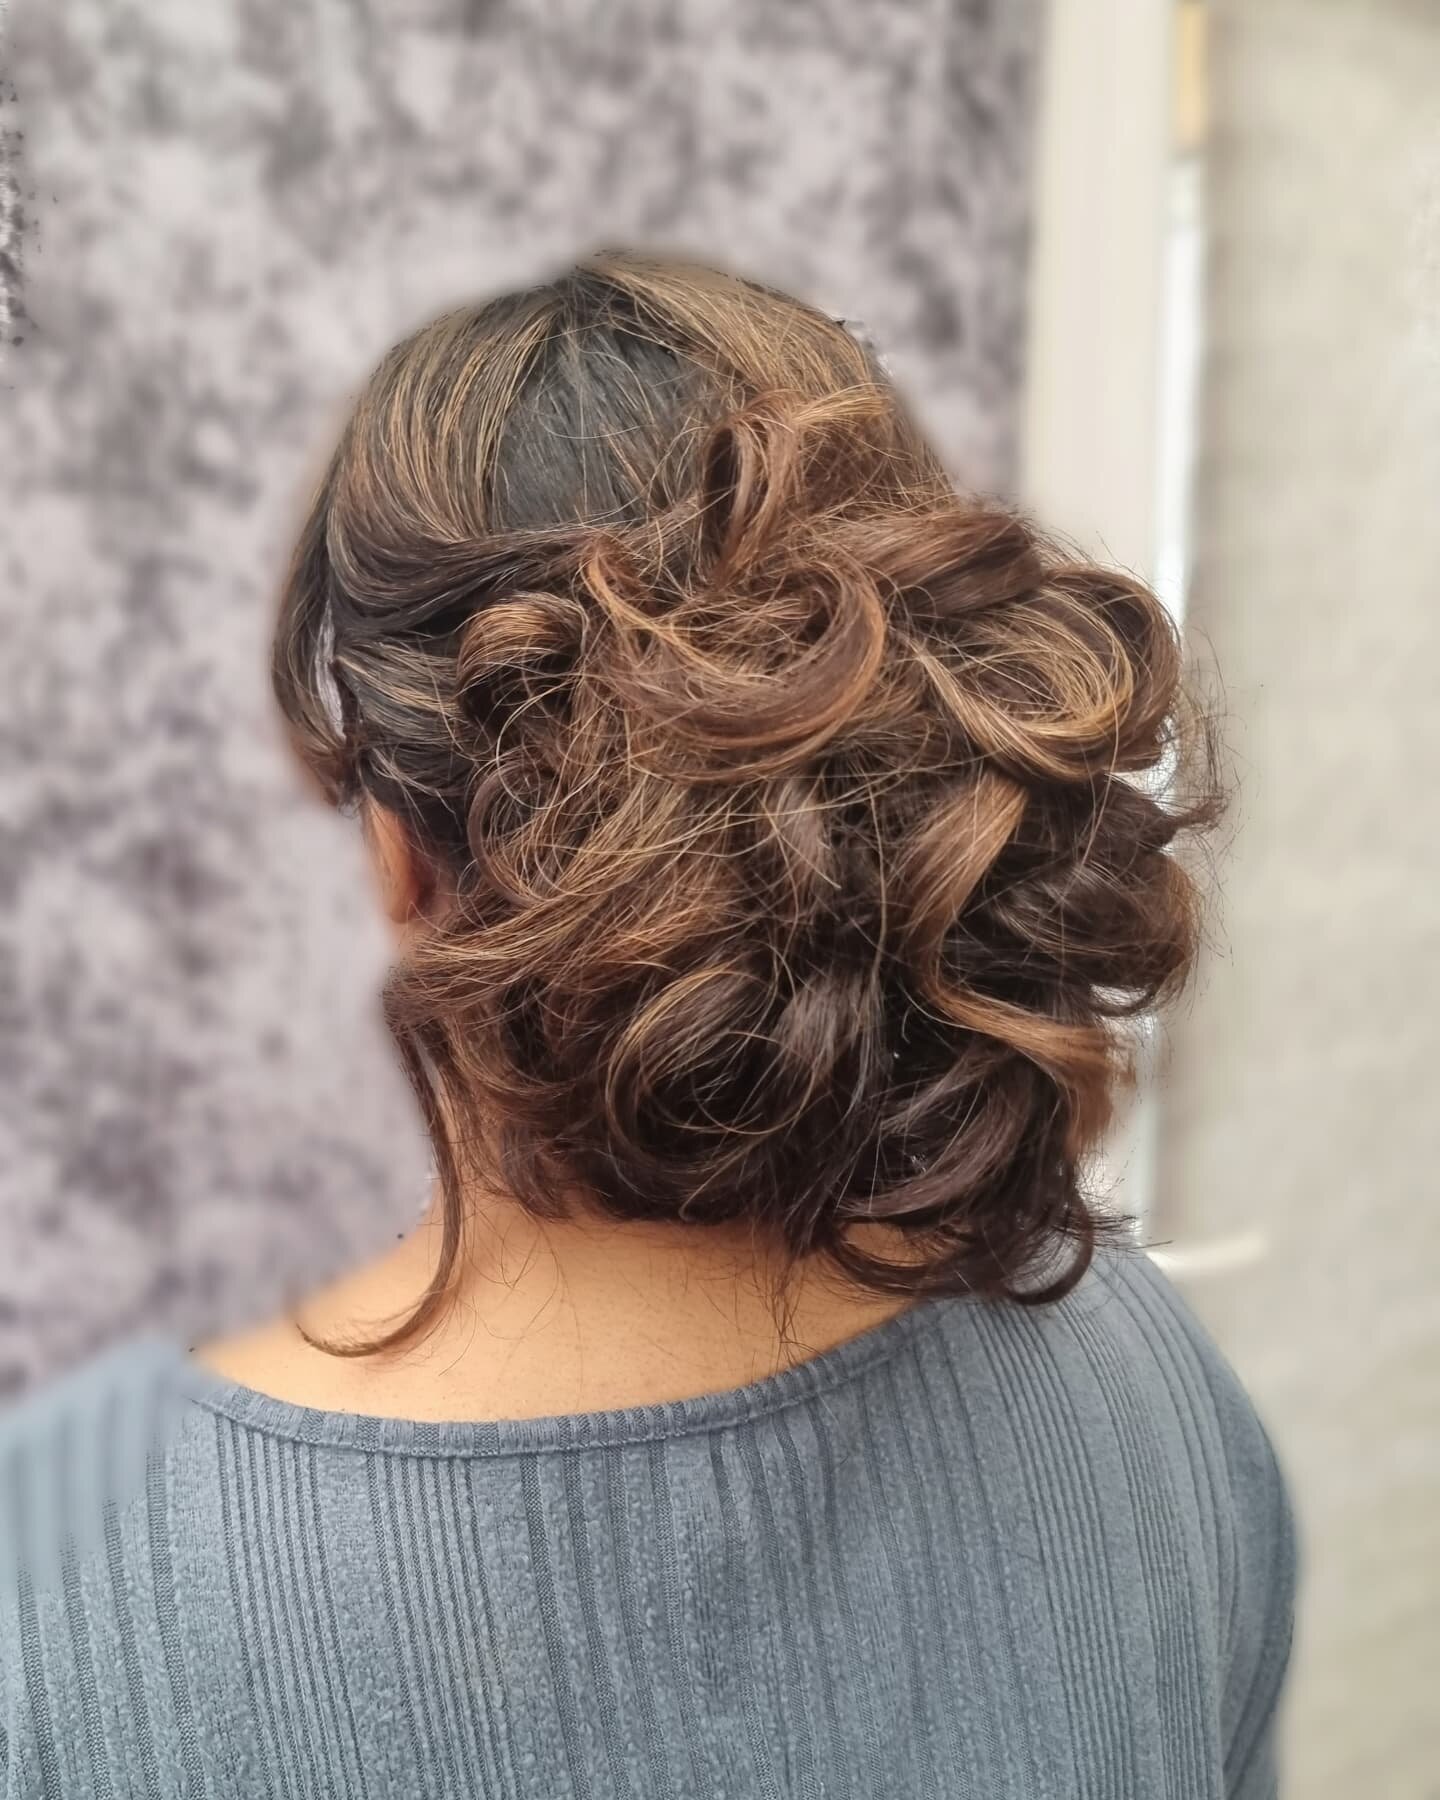 Messy Updo 🥰 all done with natural hair.

This is absolutely stunning for a bridal guest or bridesmaid.

You can enquire for your special occasions via DM or through the website: ⬇️

www.thebeautybarco.co.uk 💌

#updo #hairdo #hairup #bridalhair #in